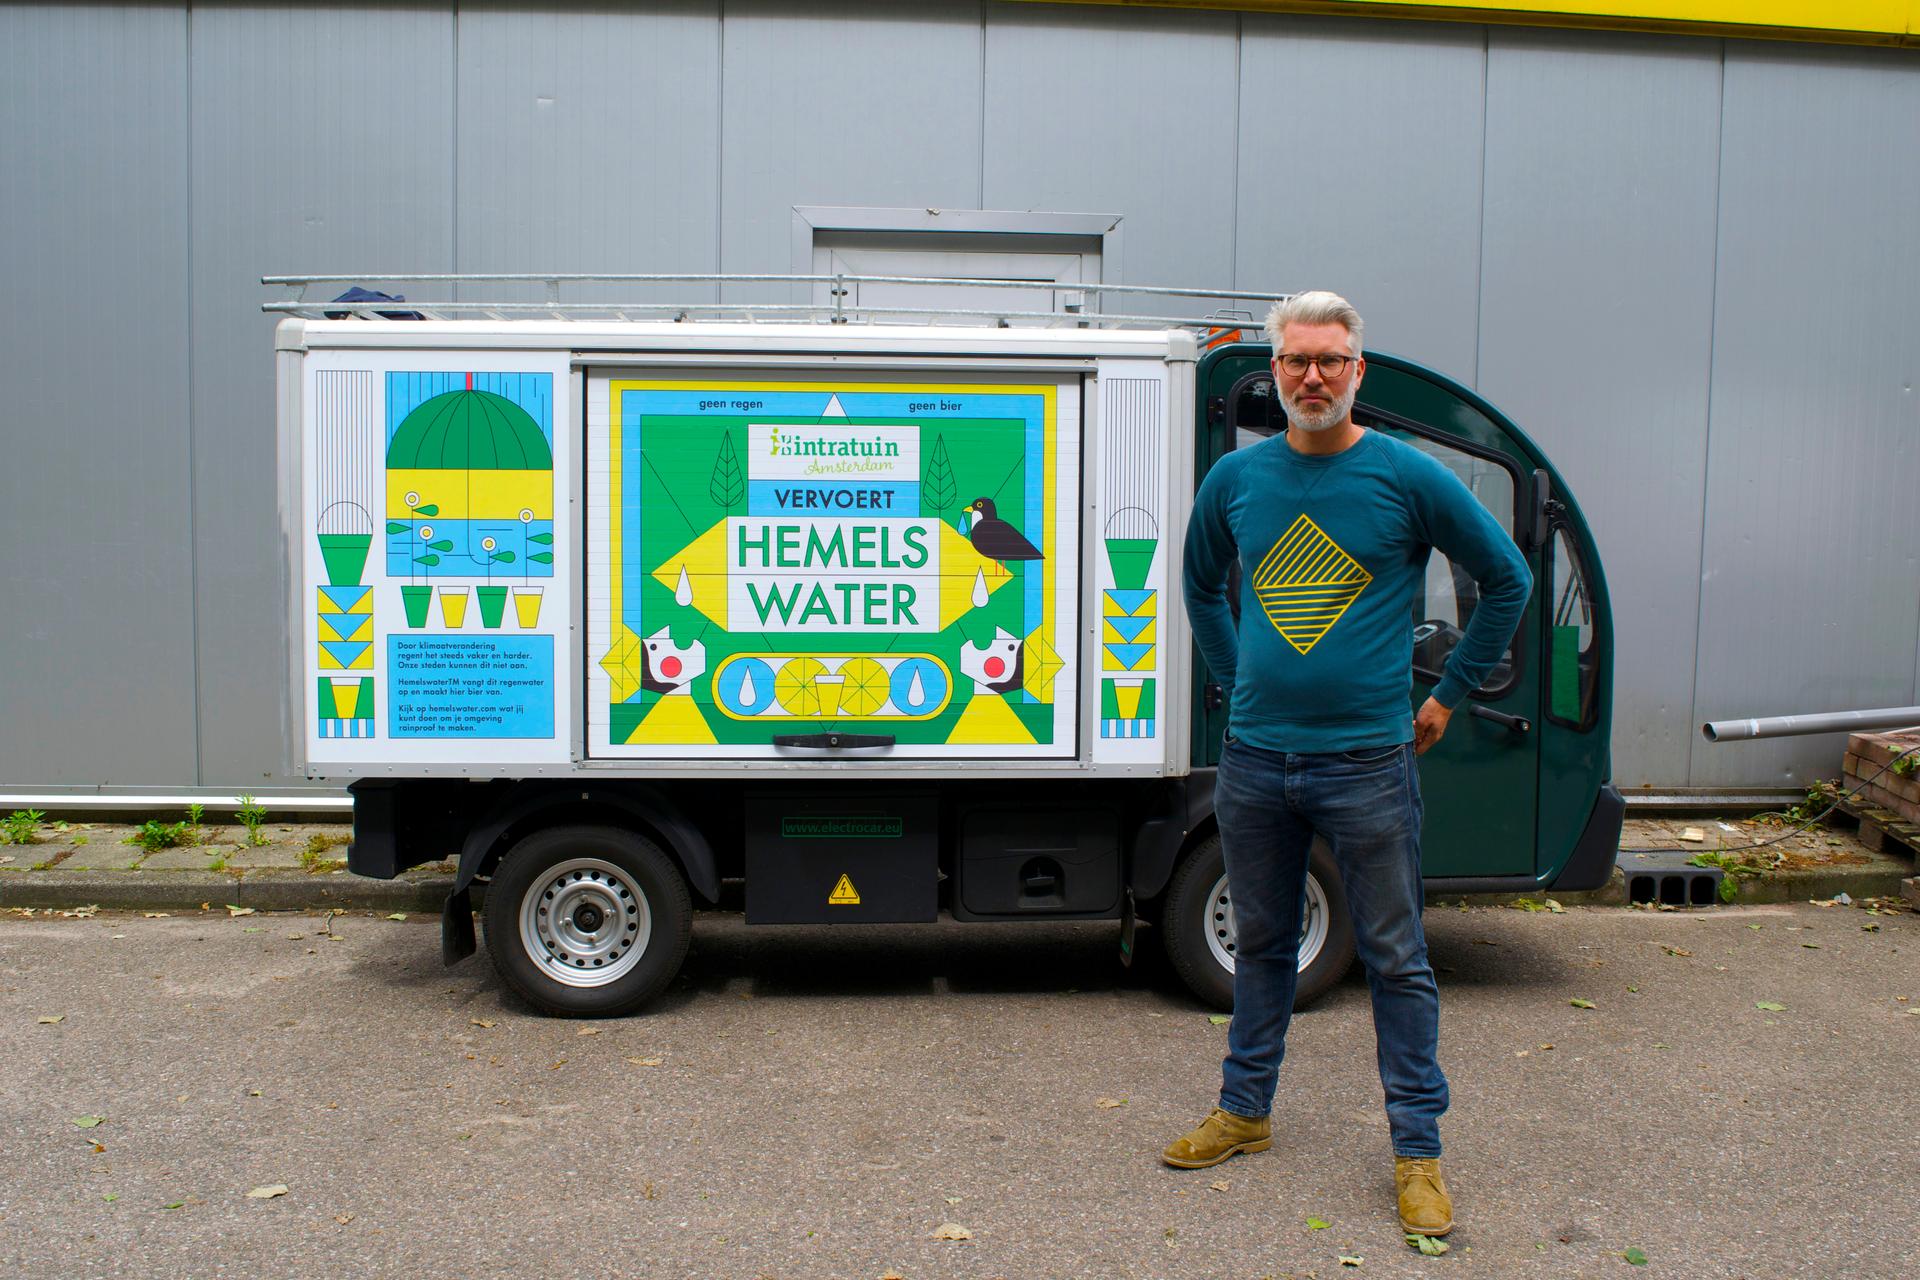 Joris Hoebe with his company's electric van. Hoebe turns 1,000 liters of rain water a week into beer, with big plans to expand.